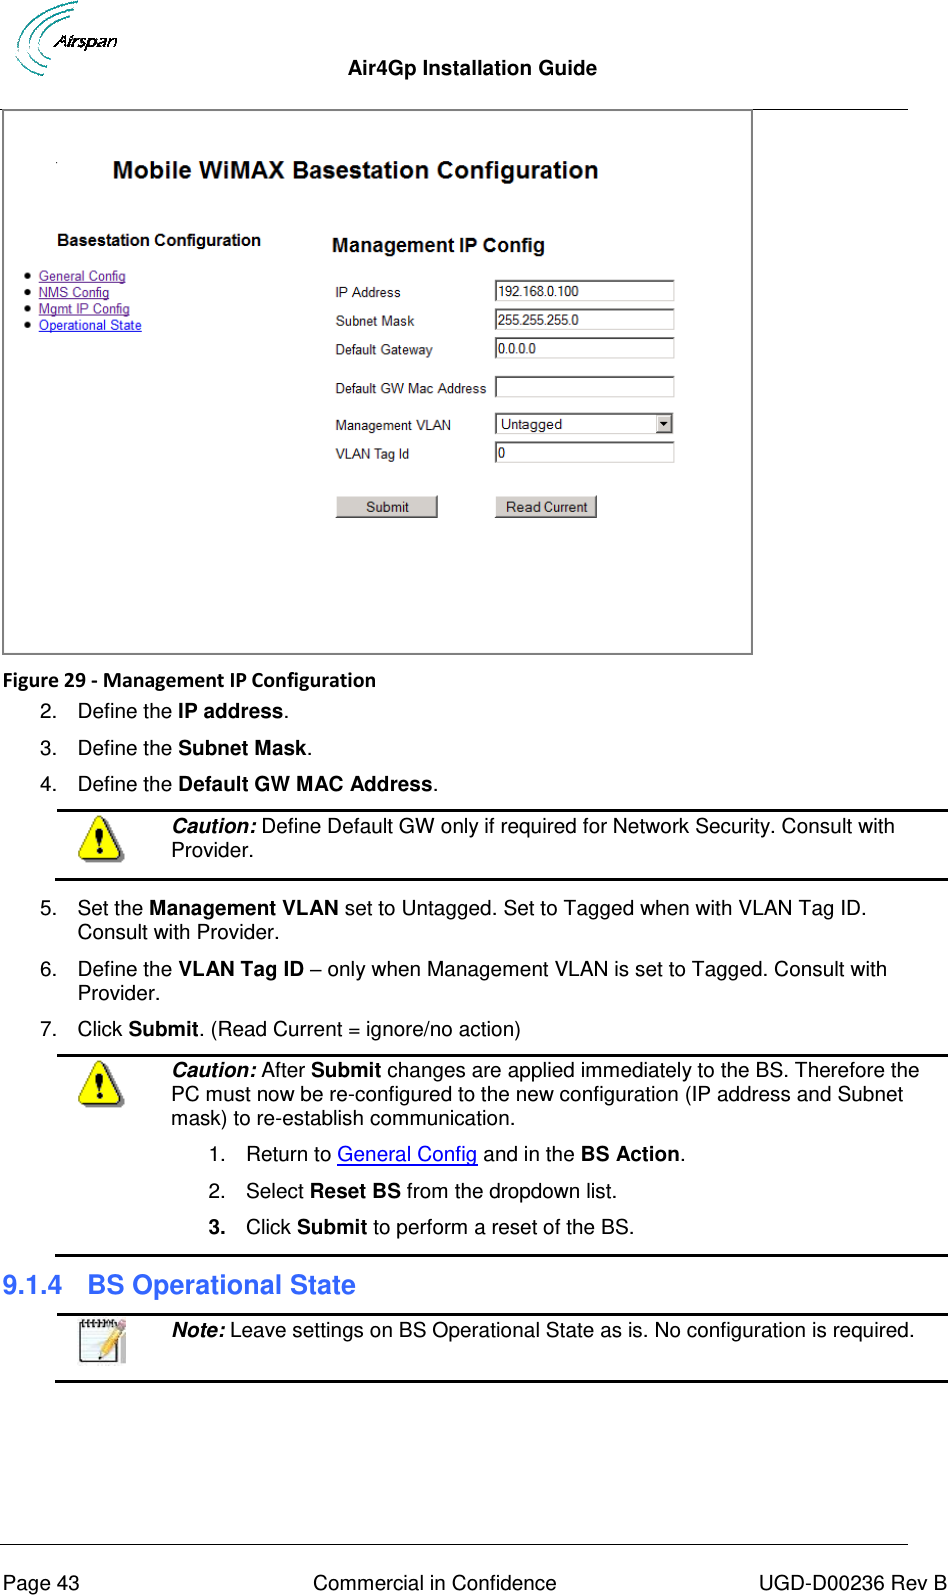  Air4Gp Installation Guide     Page 43  Commercial in Confidence  UGD-D00236 Rev B  Figure 29 - Management IP Configuration 2.  Define the IP address. 3.  Define the Subnet Mask. 4.  Define the Default GW MAC Address.  Caution: Define Default GW only if required for Network Security. Consult with Provider.  5.  Set the Management VLAN set to Untagged. Set to Tagged when with VLAN Tag ID. Consult with Provider. 6.  Define the VLAN Tag ID – only when Management VLAN is set to Tagged. Consult with Provider. 7.  Click Submit. (Read Current = ignore/no action)  Caution: After Submit changes are applied immediately to the BS. Therefore the PC must now be re-configured to the new configuration (IP address and Subnet mask) to re-establish communication.  1.  Return to General Config and in the BS Action.  2.  Select Reset BS from the dropdown list.  3. Click Submit to perform a reset of the BS. 9.1.4  BS Operational State   Note: Leave settings on BS Operational State as is. No configuration is required. 